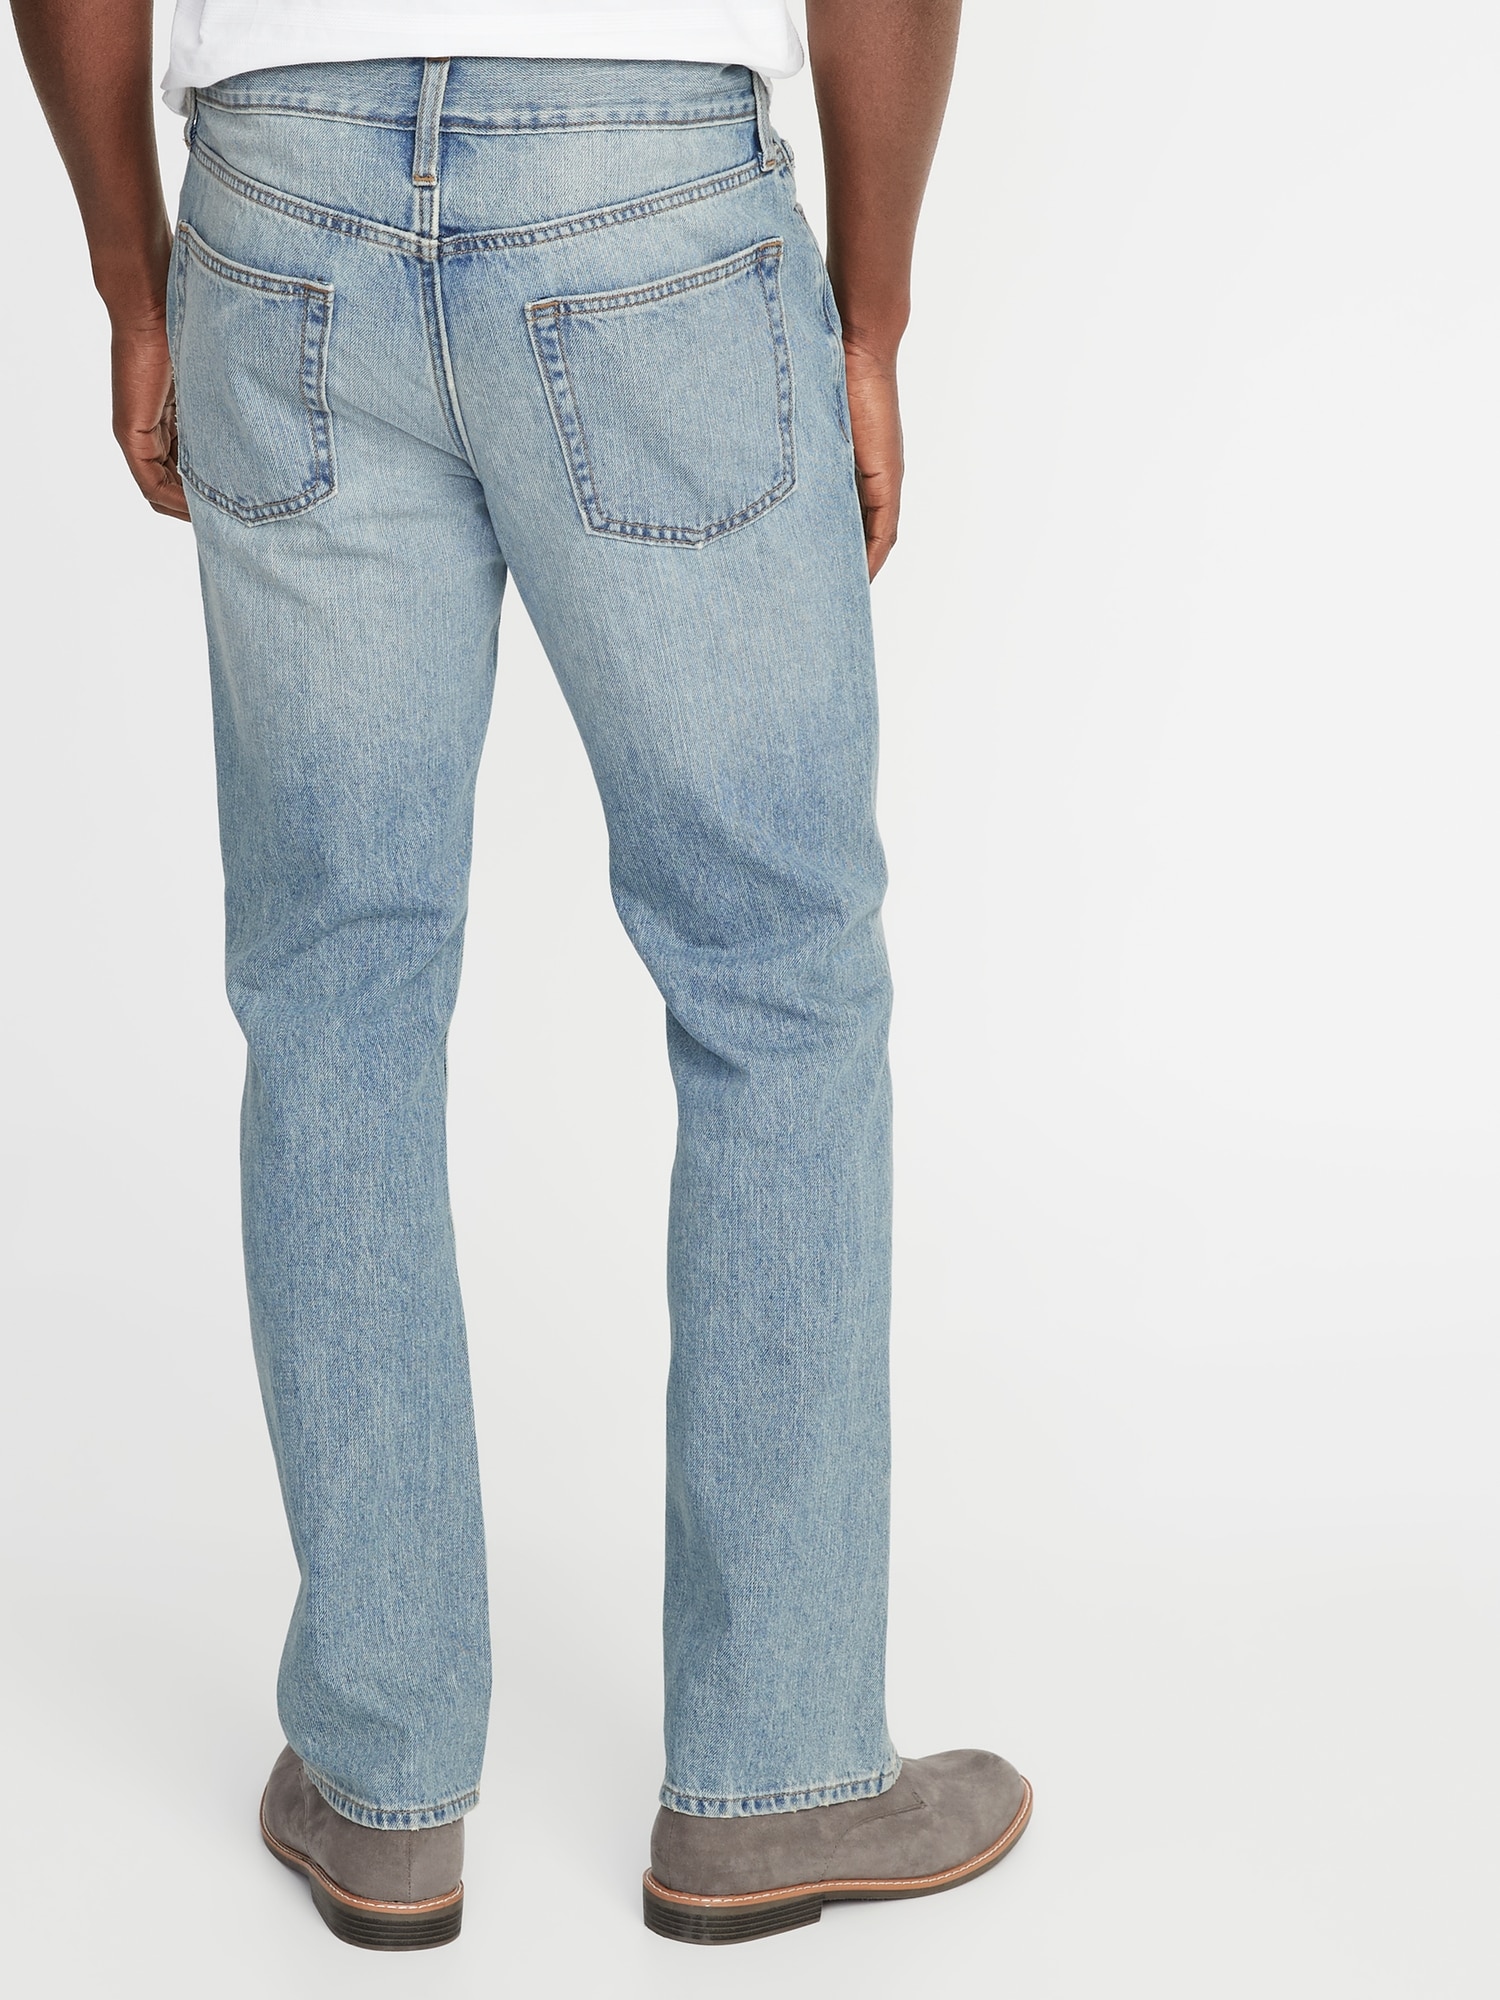 old navy straight jeans mens